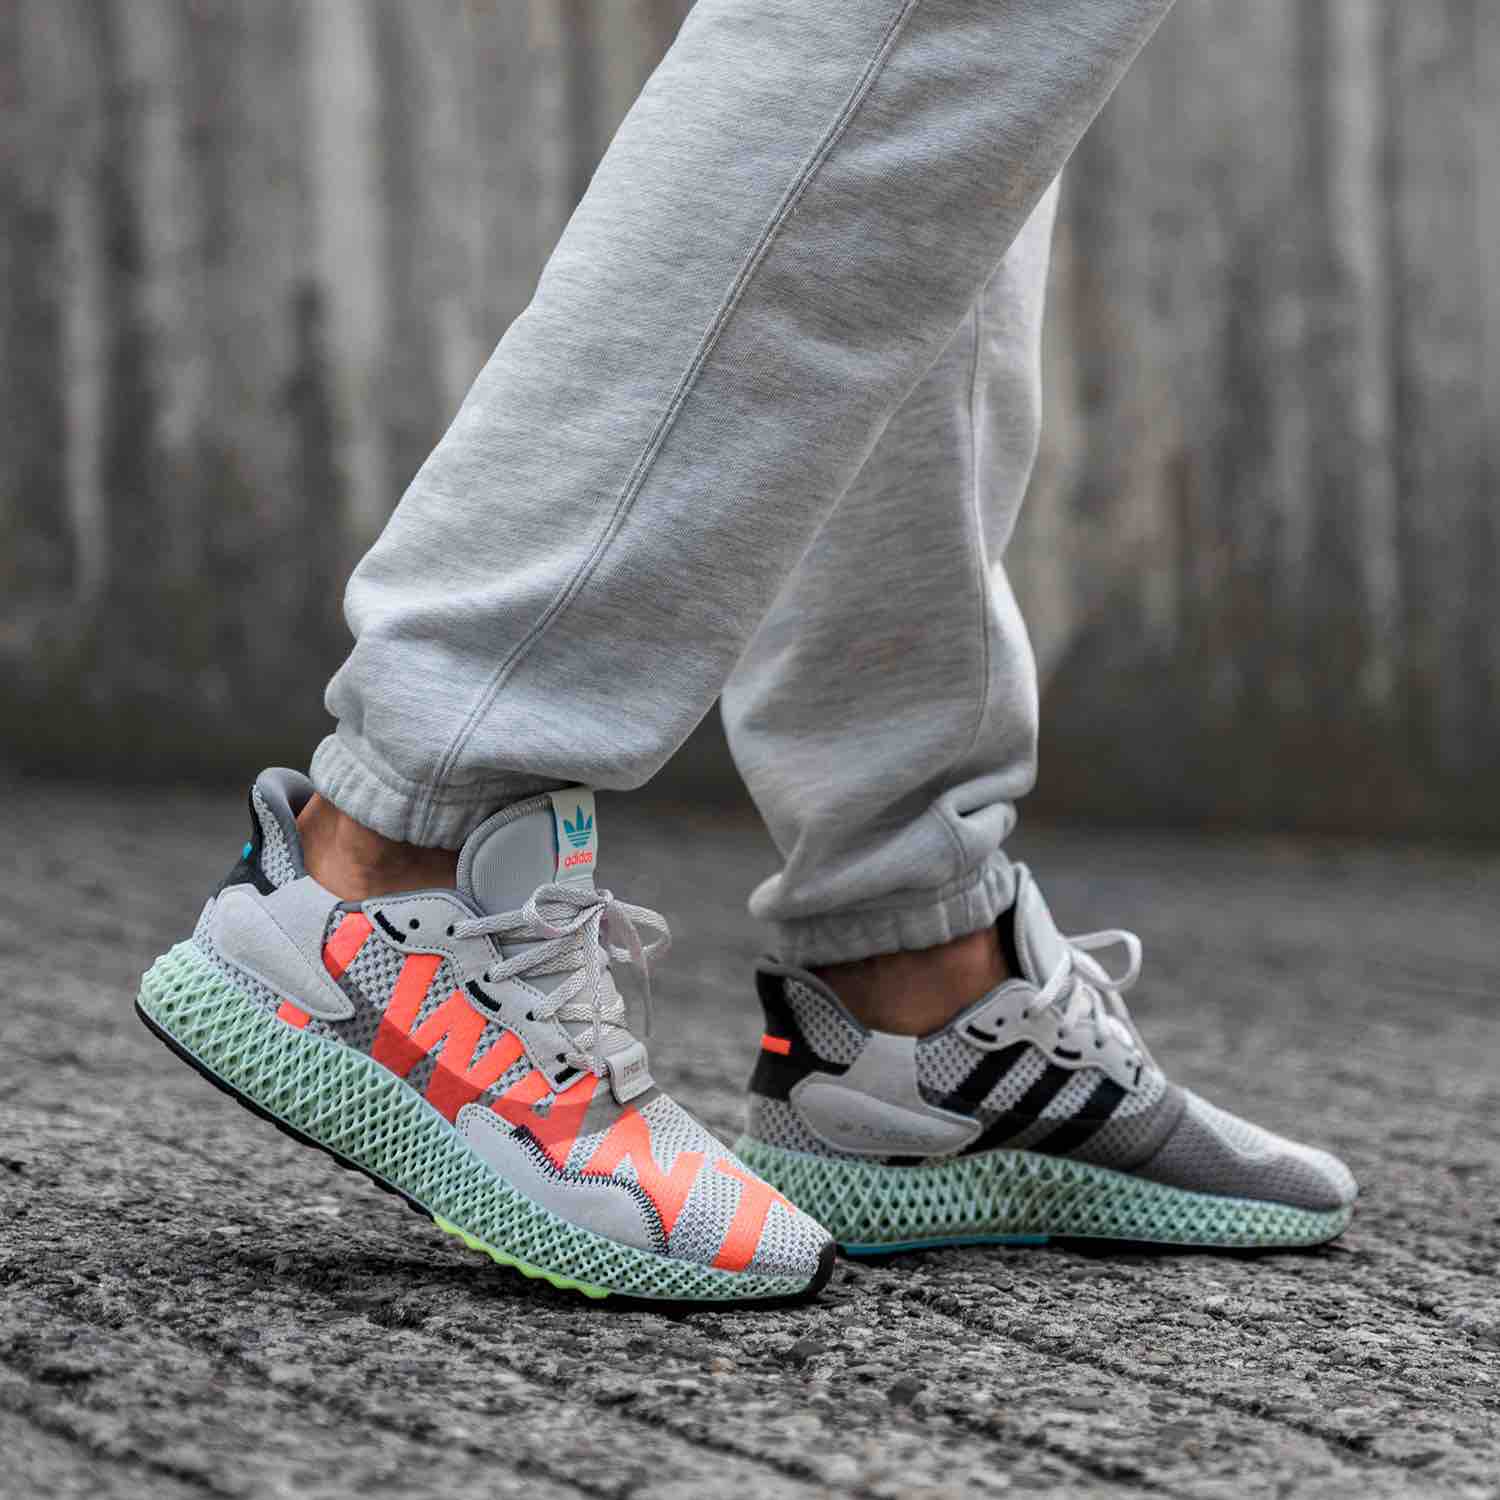 Adidas ZX 4000 4D
« I Want I Can »